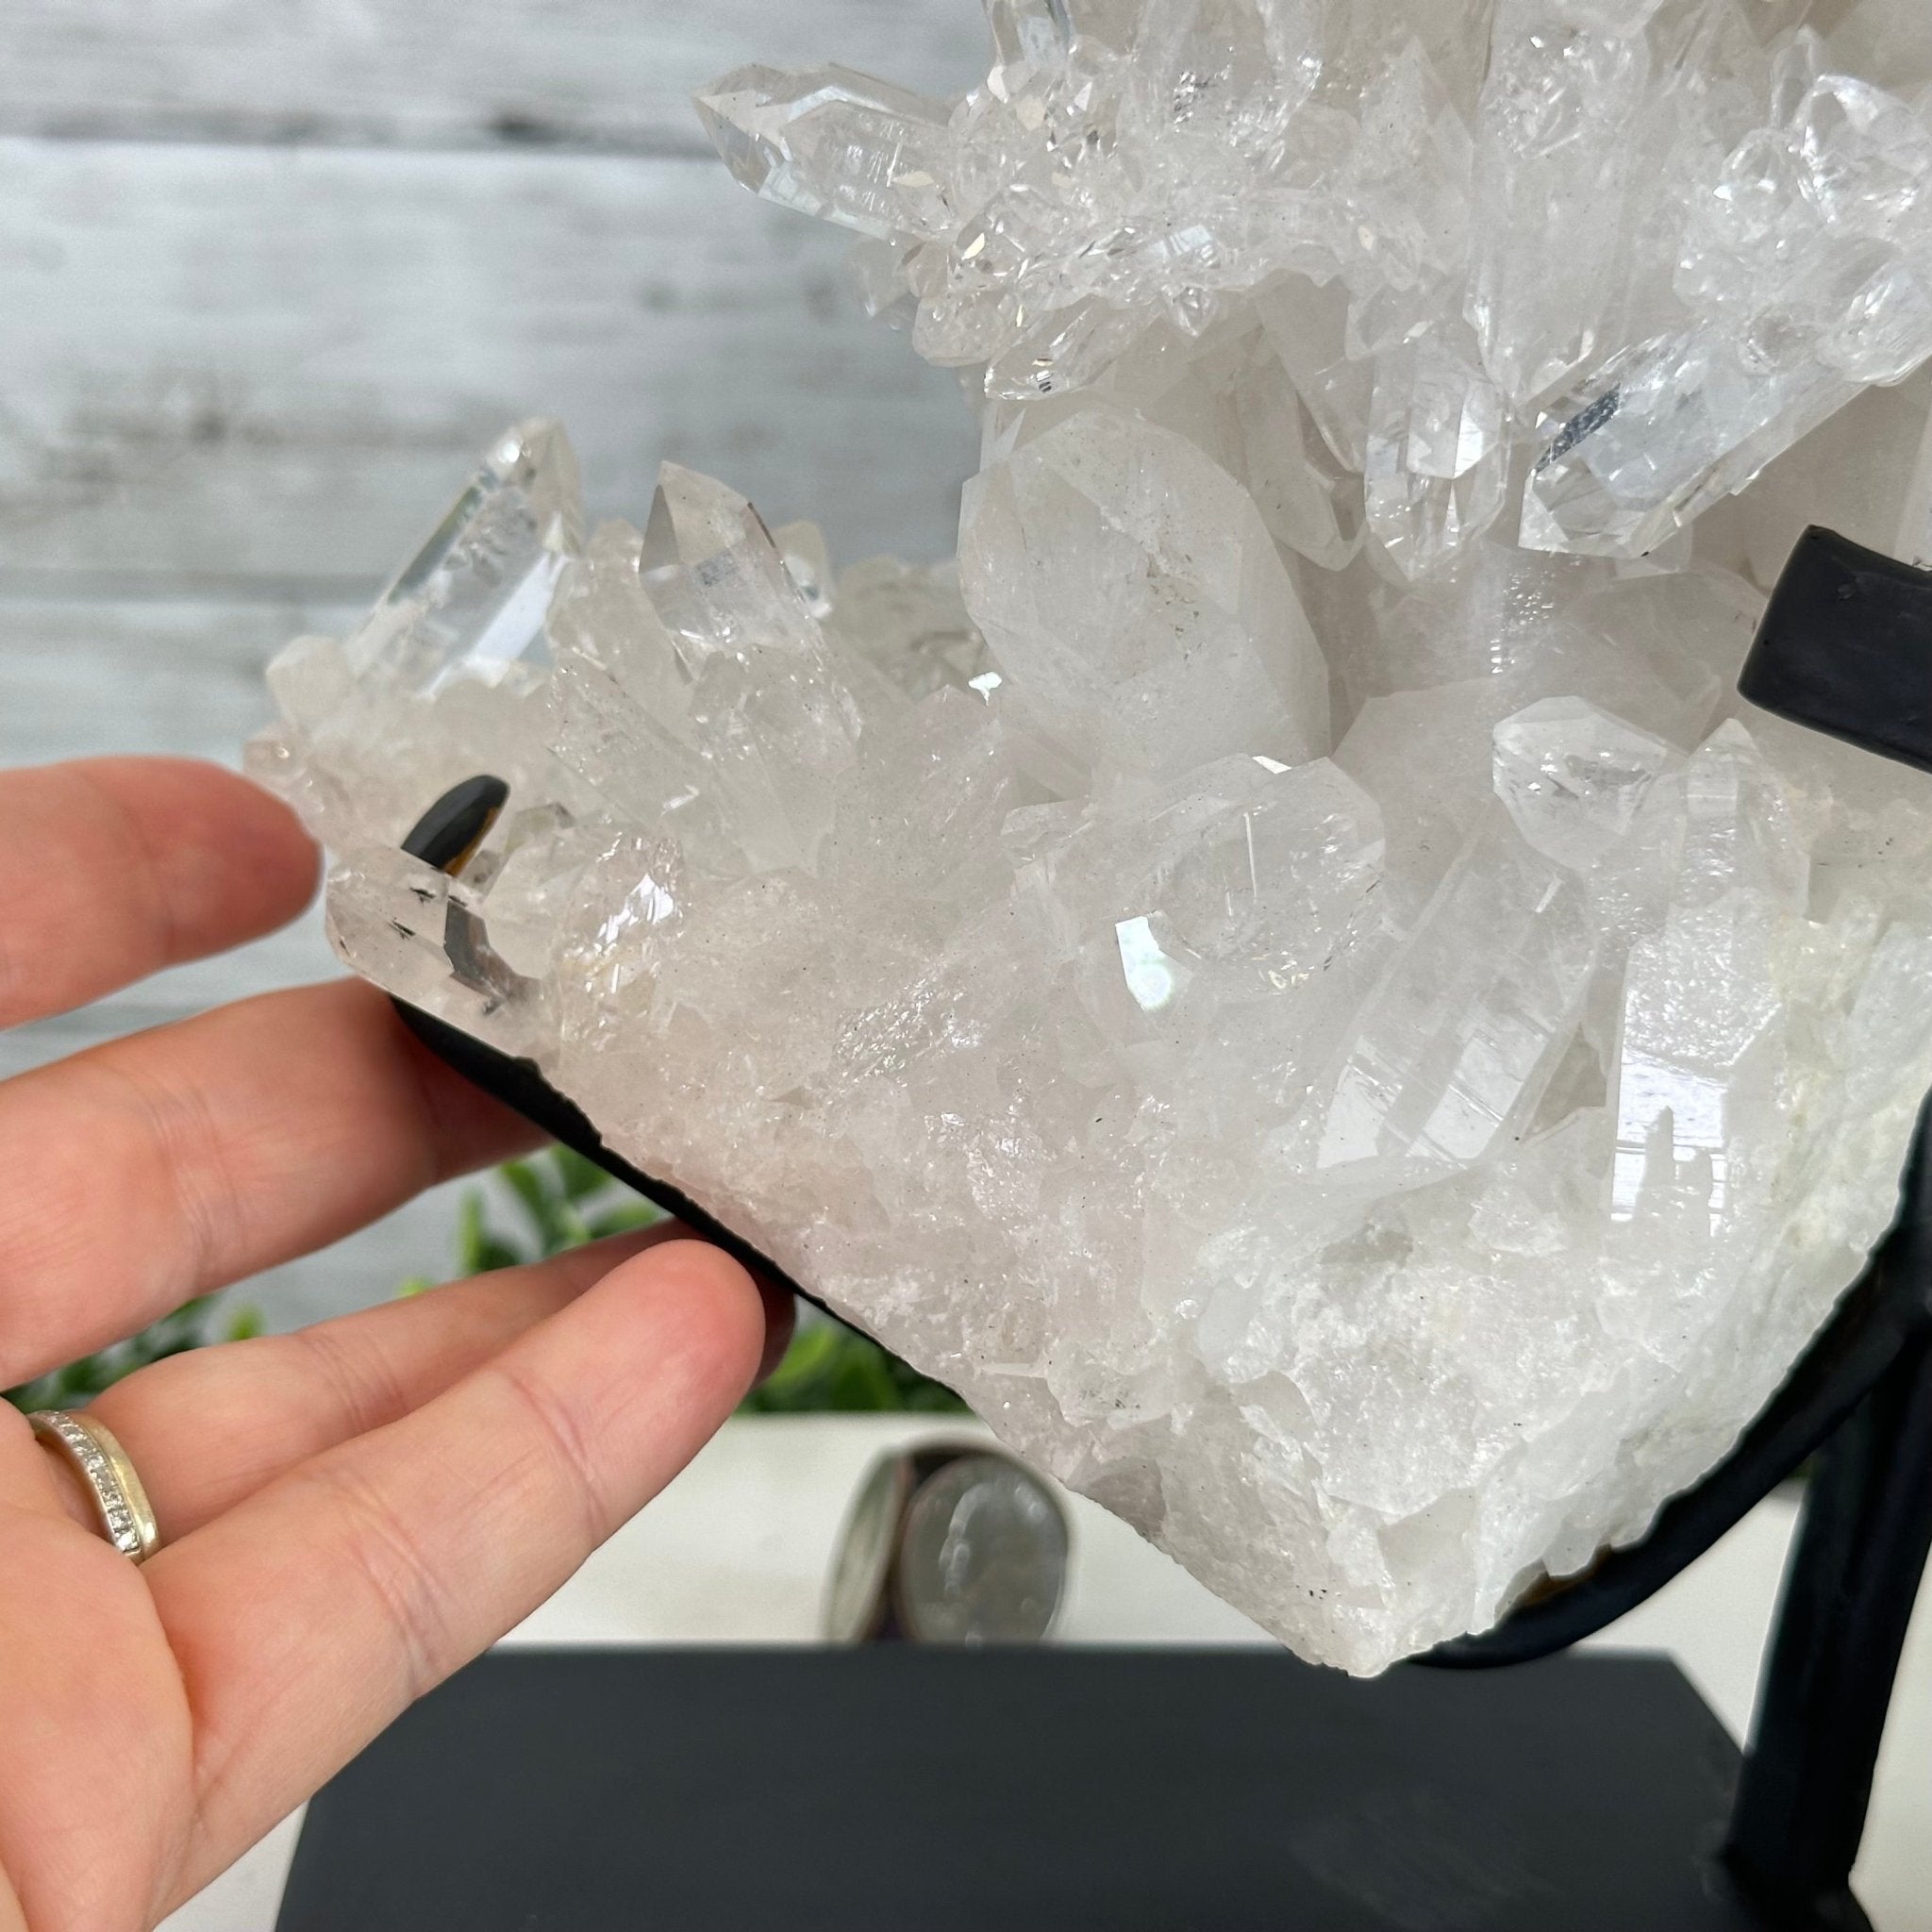 Super Quality Brazilian Clear Quartz Crystal Cluster, metal base, 8.1 lbs & 10" Tall #5495-0073 by Brazil Gems - Brazil GemsBrazil GemsSuper Quality Brazilian Clear Quartz Crystal Cluster, metal base, 8.1 lbs & 10" Tall #5495-0073 by Brazil GemsClusters on Fixed Bases5495-0073